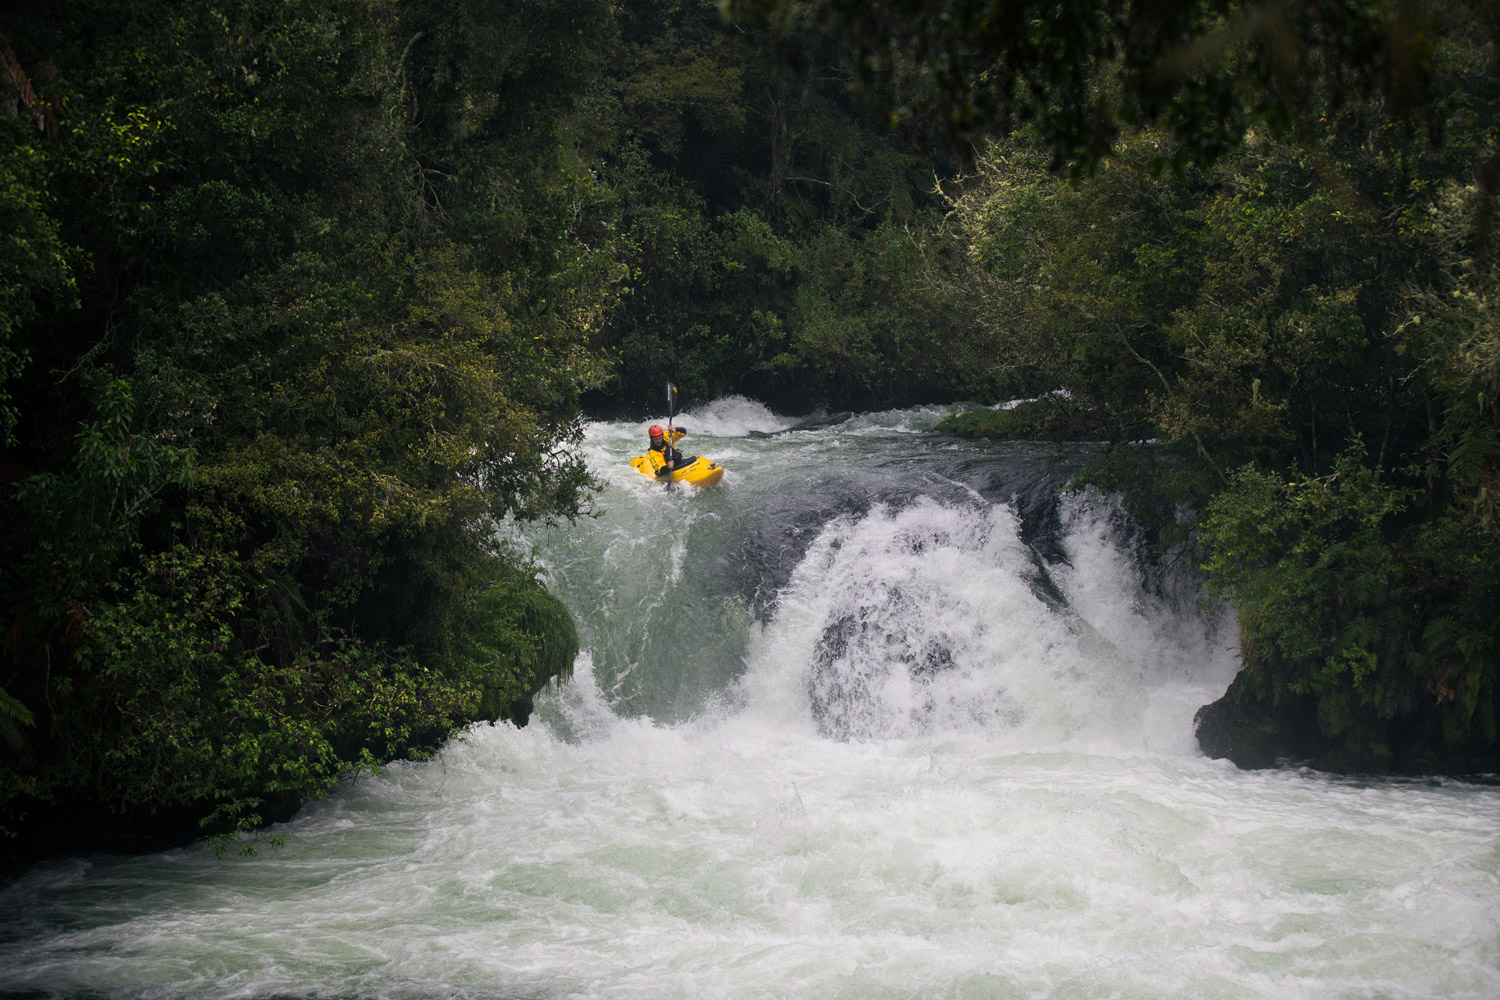 Ryan approaches the lip of the Trout Pools waterfall on the Kaituna River.